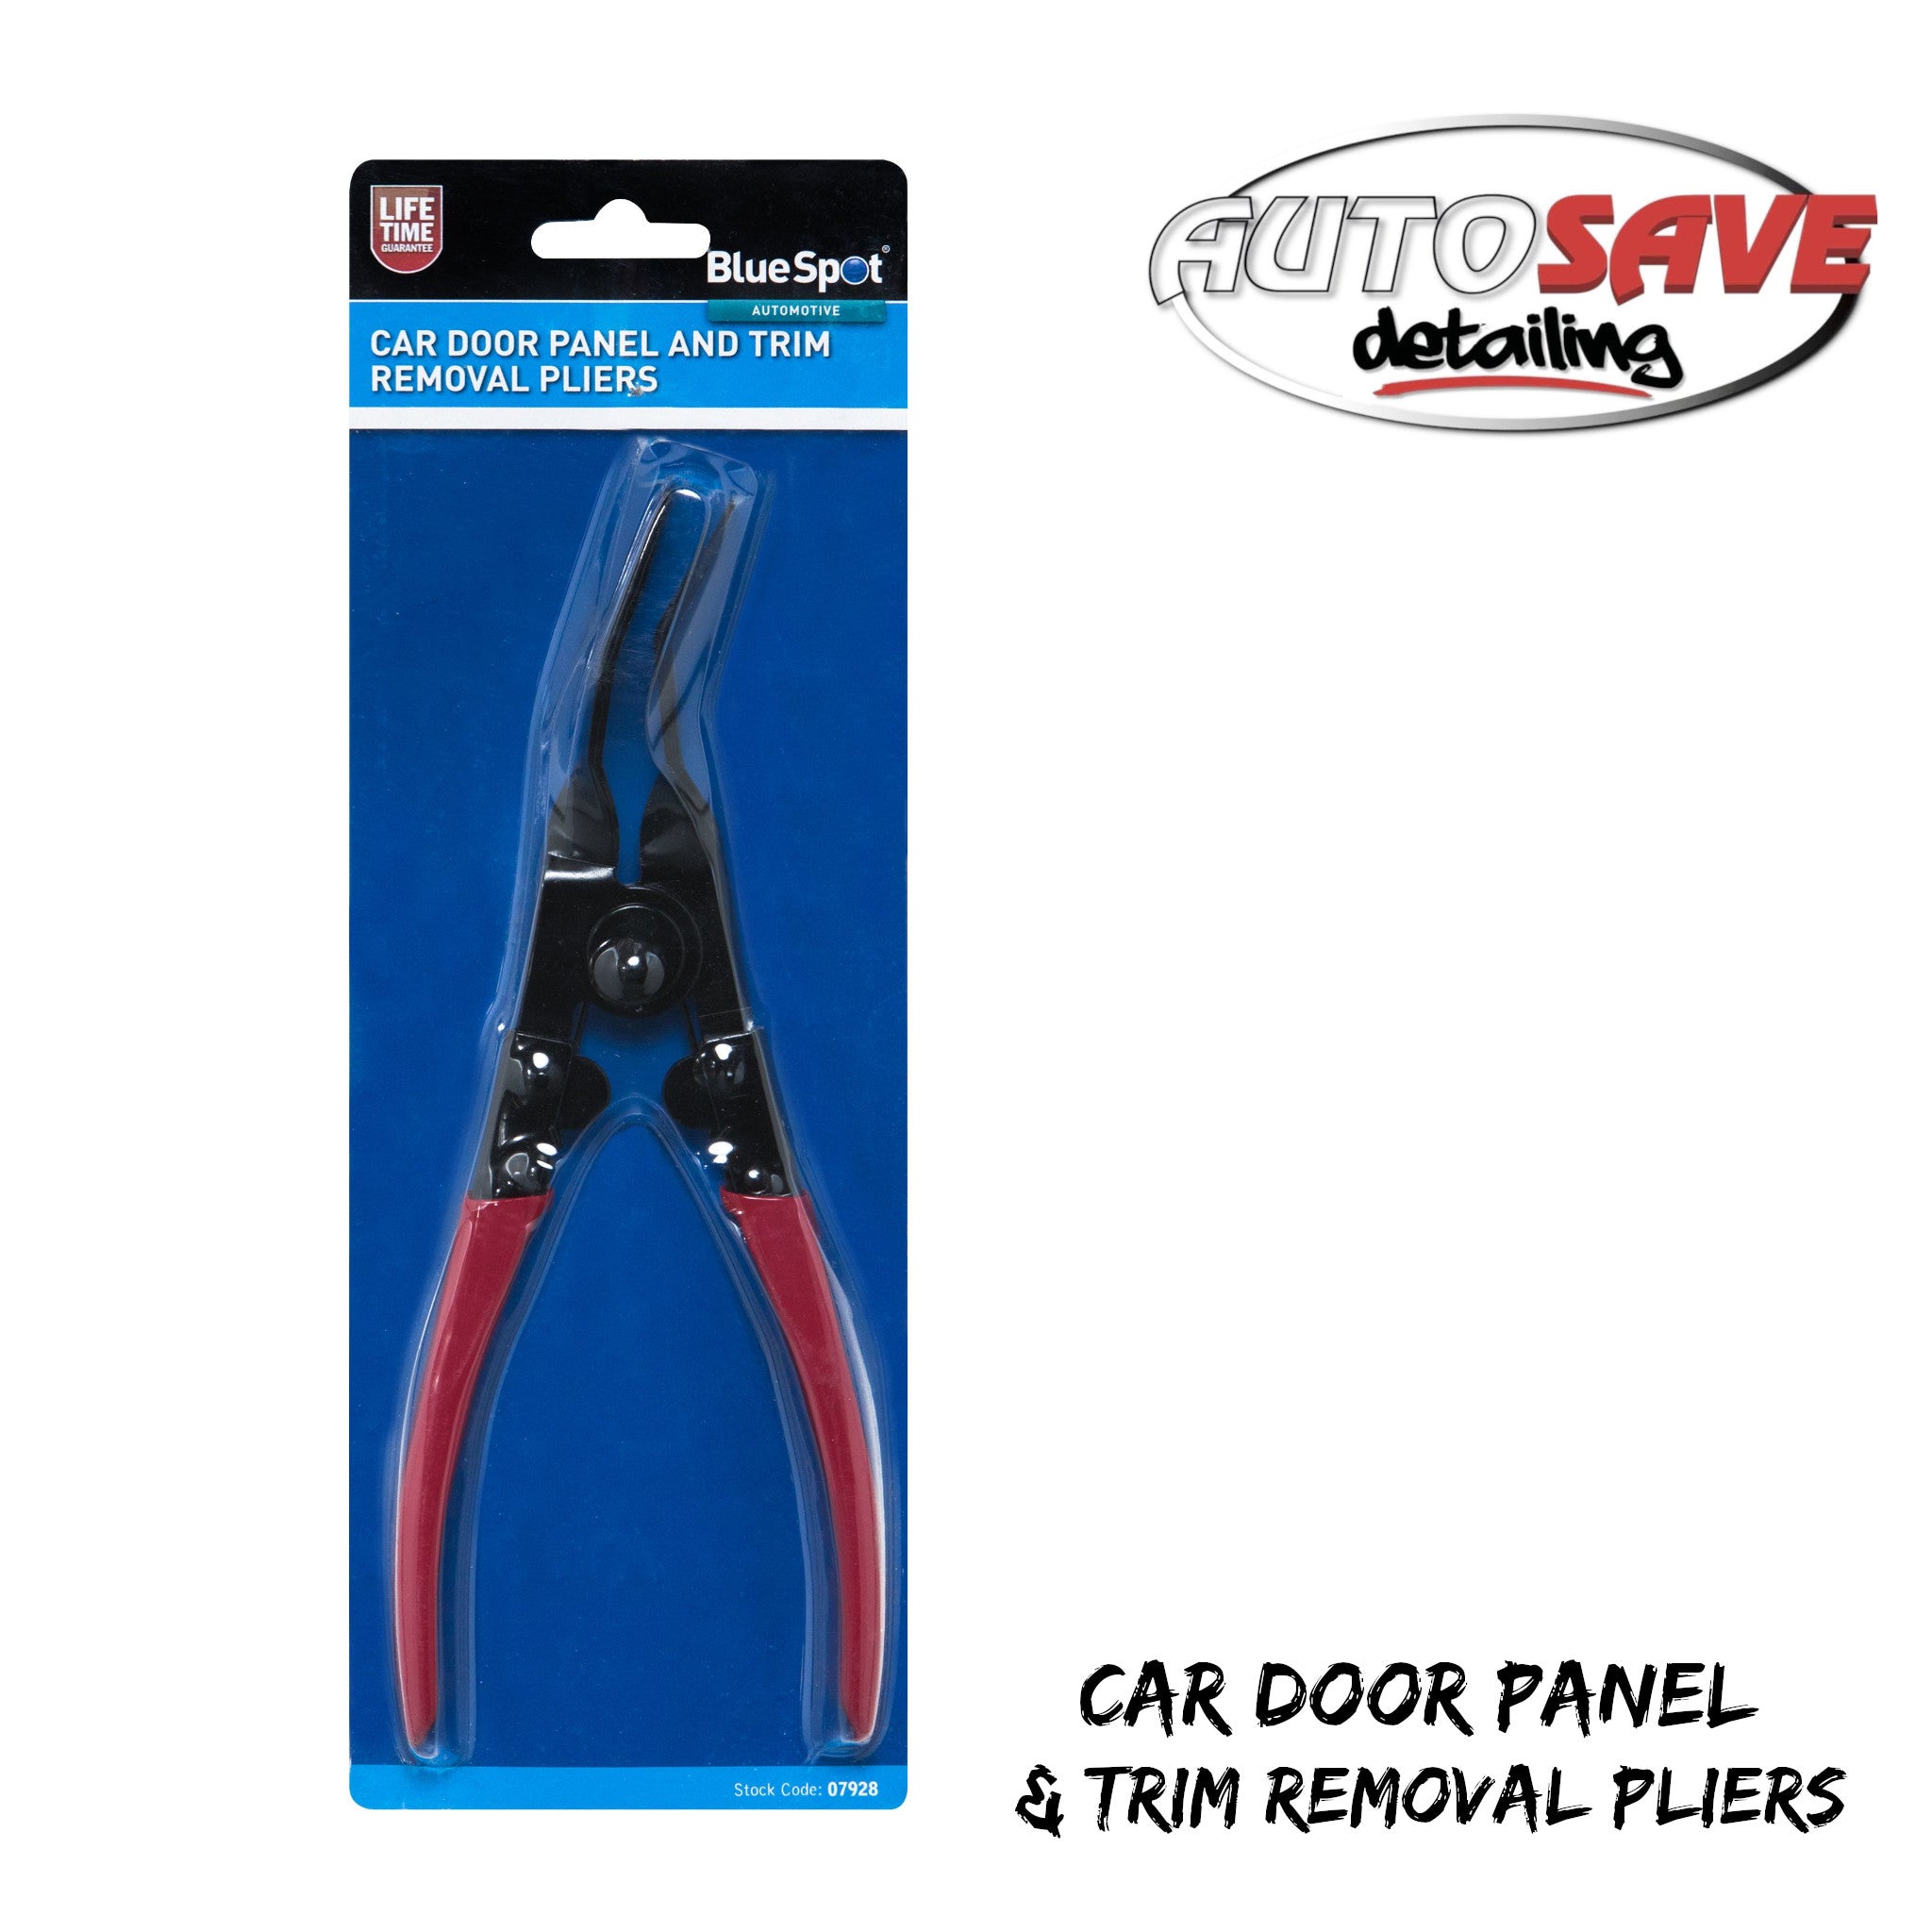 CAR DOOR PANEL AND TRIM REMOVAL PLIERS – Autosave Components